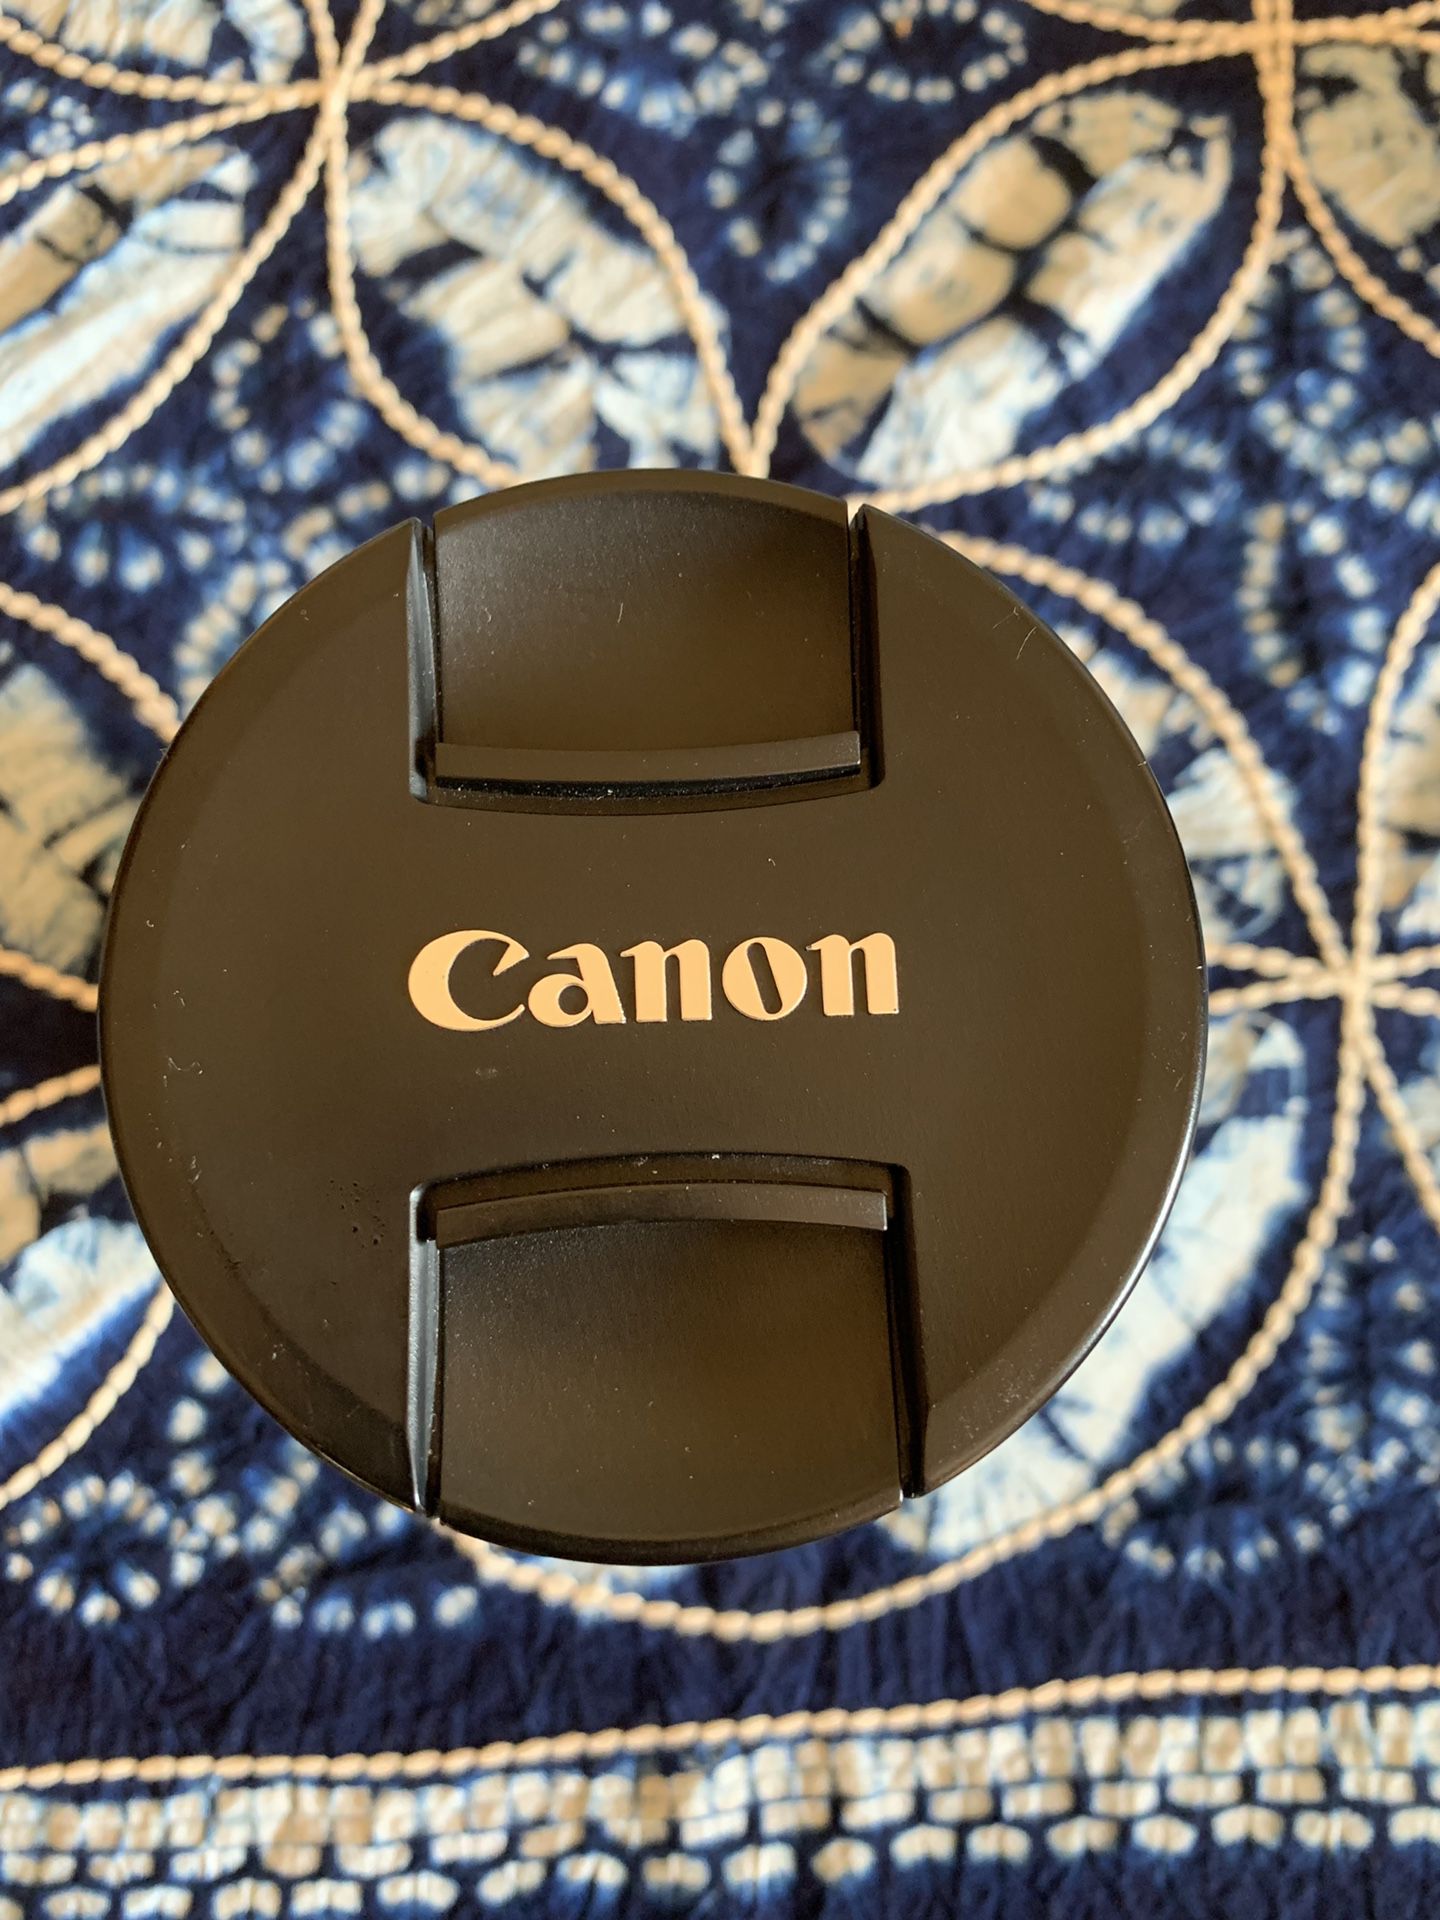 Canon wide angle zoom lens